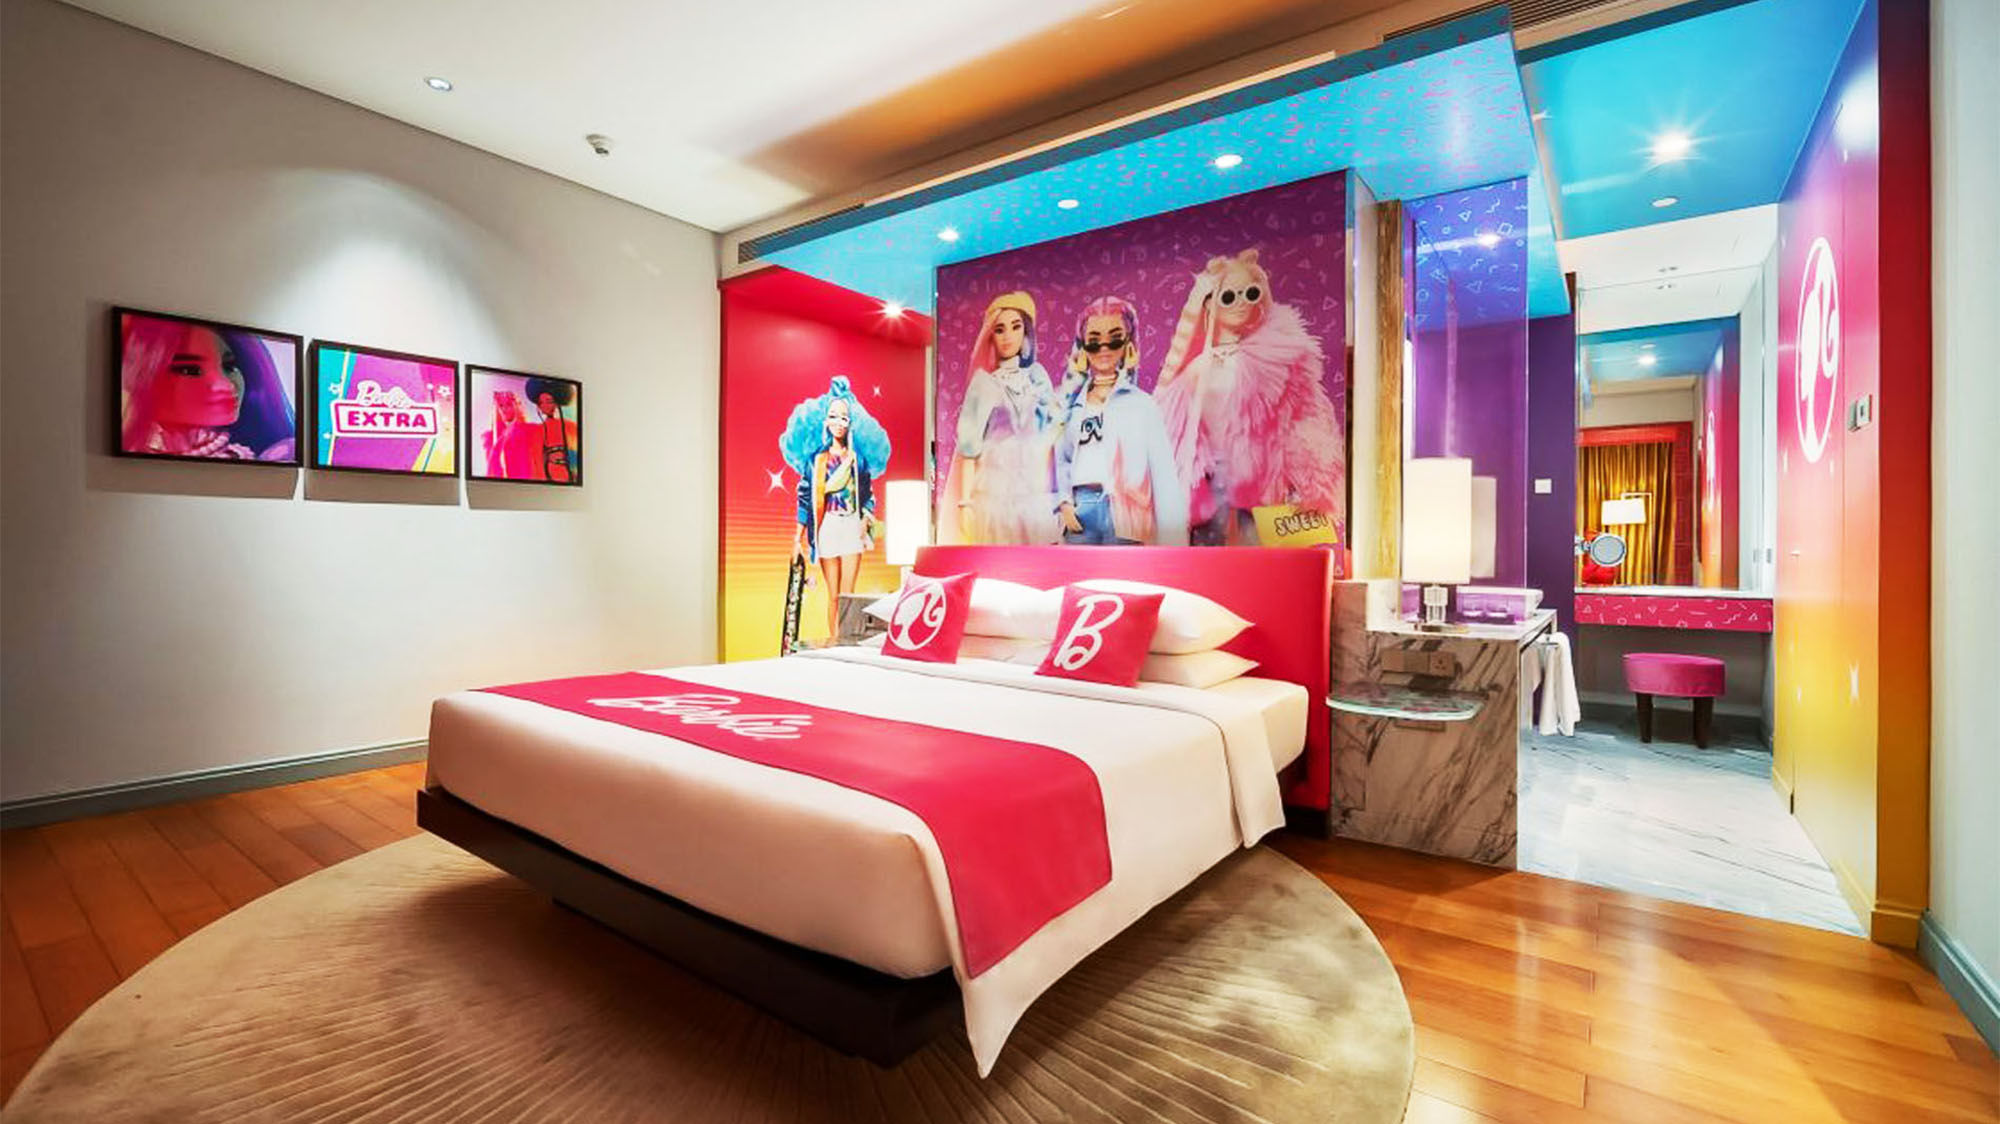 One of 14 Barbie-themed rooms available at the Grand Hyatt Kuala Lumpur. The rooms, which launched in late 2019, can be booked as part of a Barbie Ultimate Staycation package.